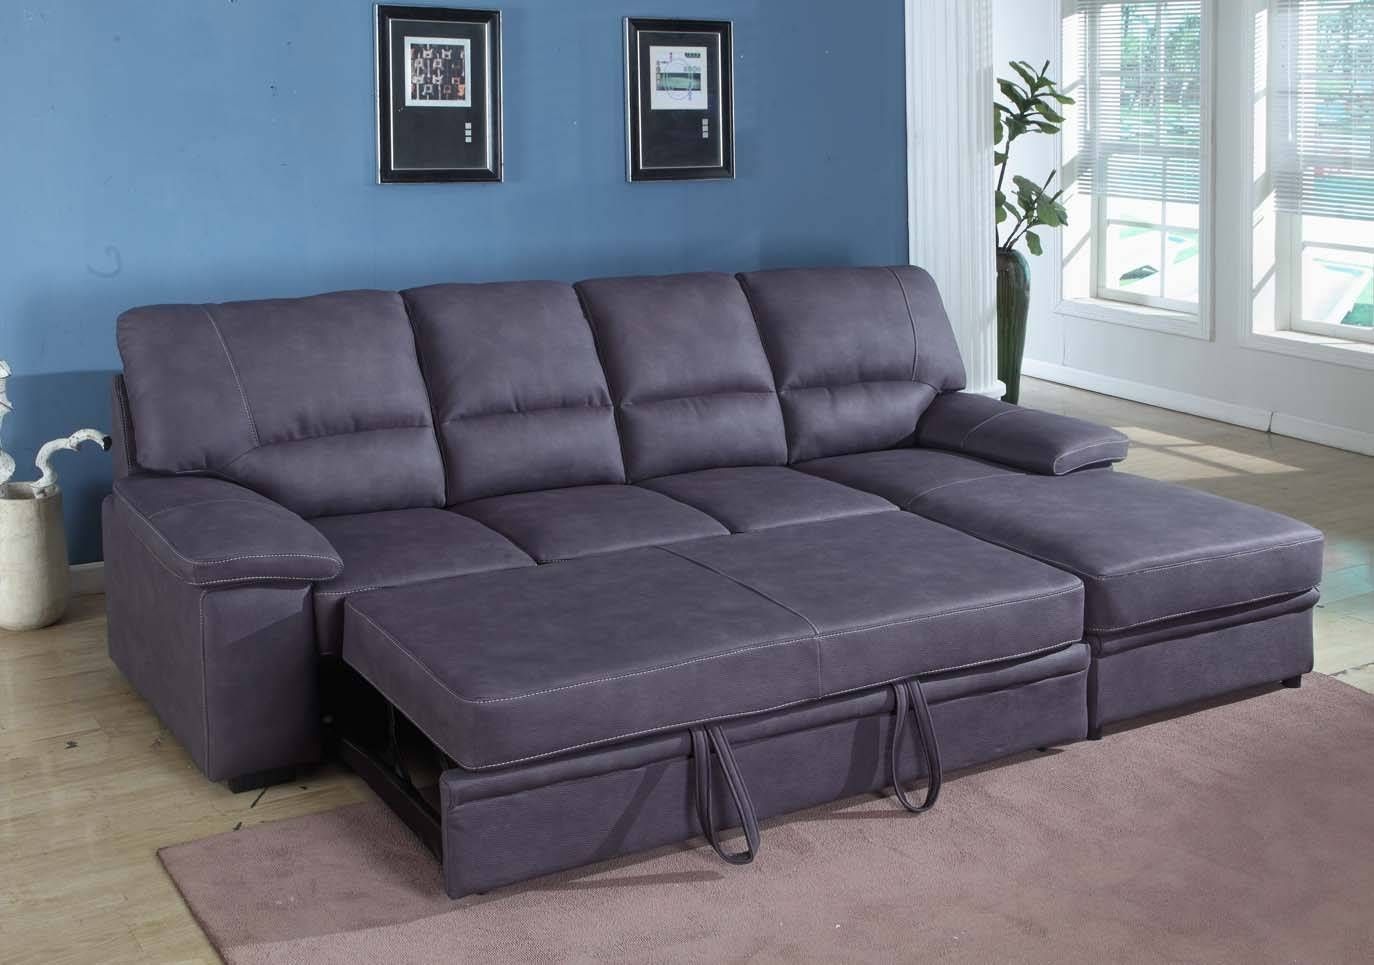 Chaise Sectional Sofa With Storage Ottoman | Tehranmix Decoration With Sectional Sofas With Sleeper And Chaise (View 23 of 30)